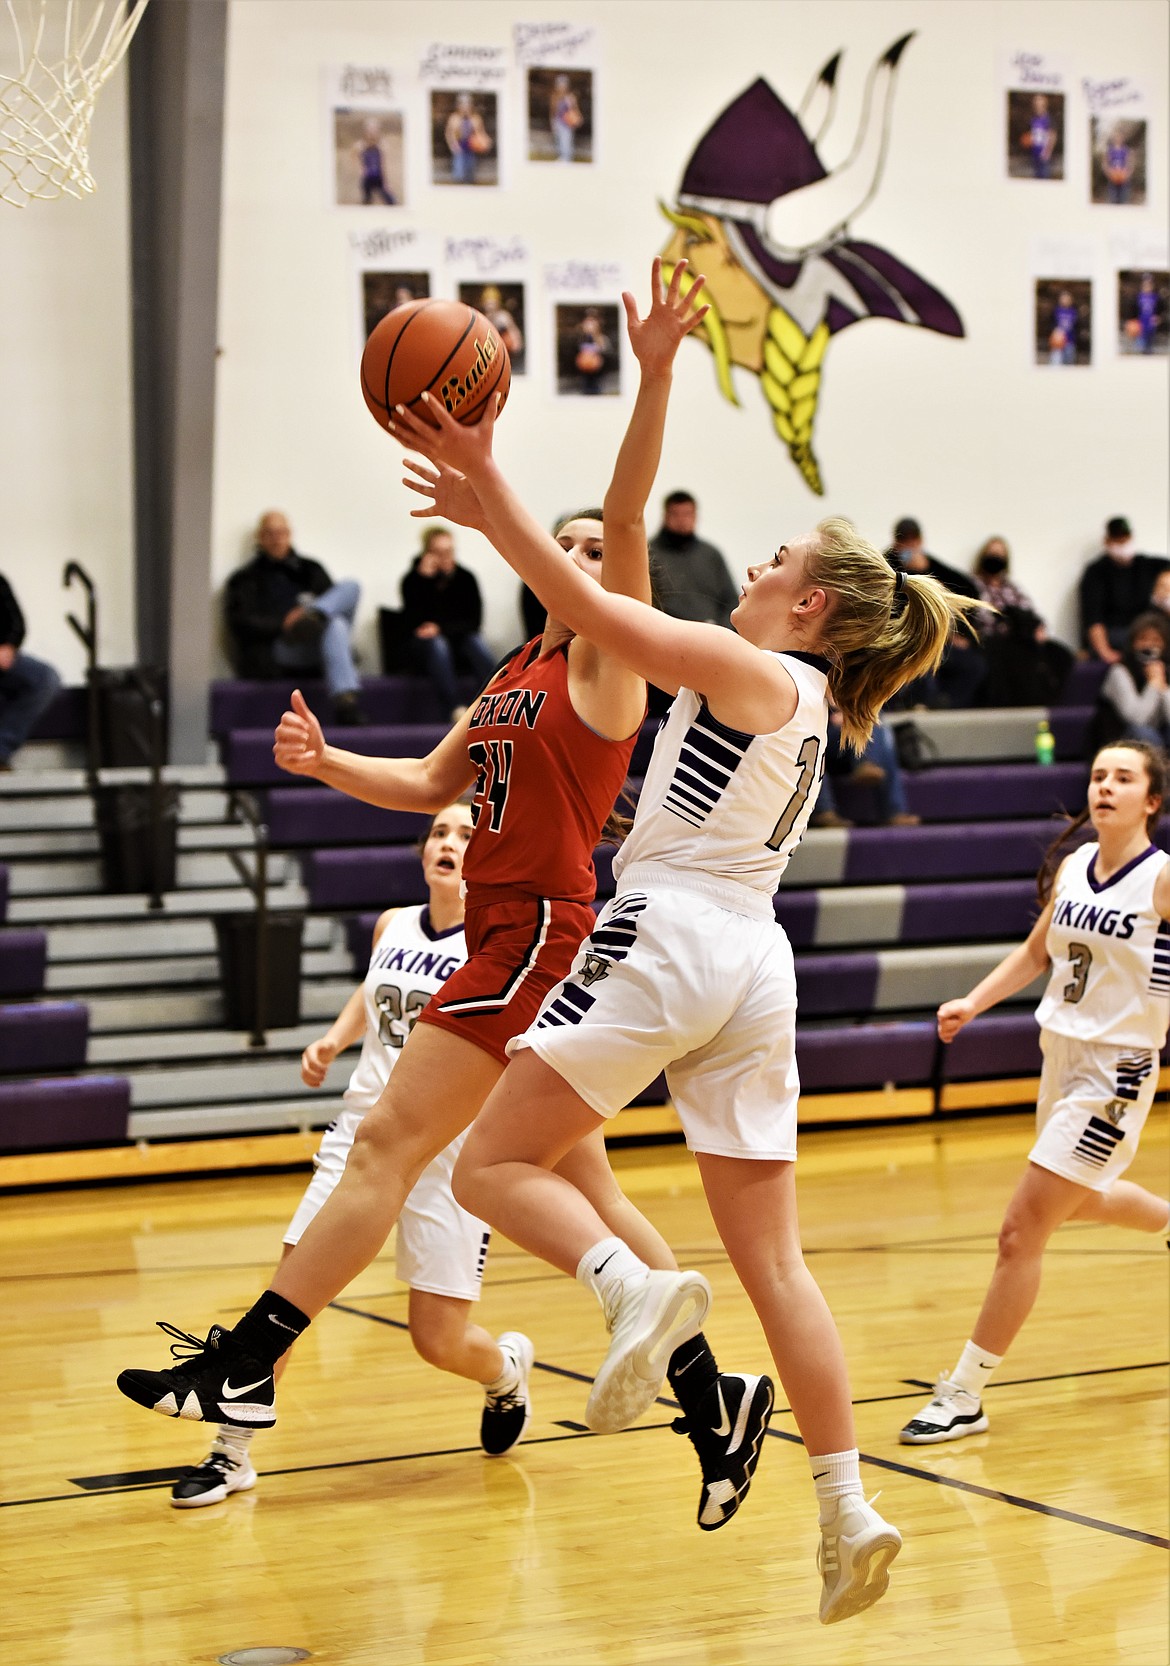 Charlo's Kassidy Cox puts up a shot as Noxon's Avery Burgess defends Saturday at Charlo. (Scot Heisel/Lake County Leader)